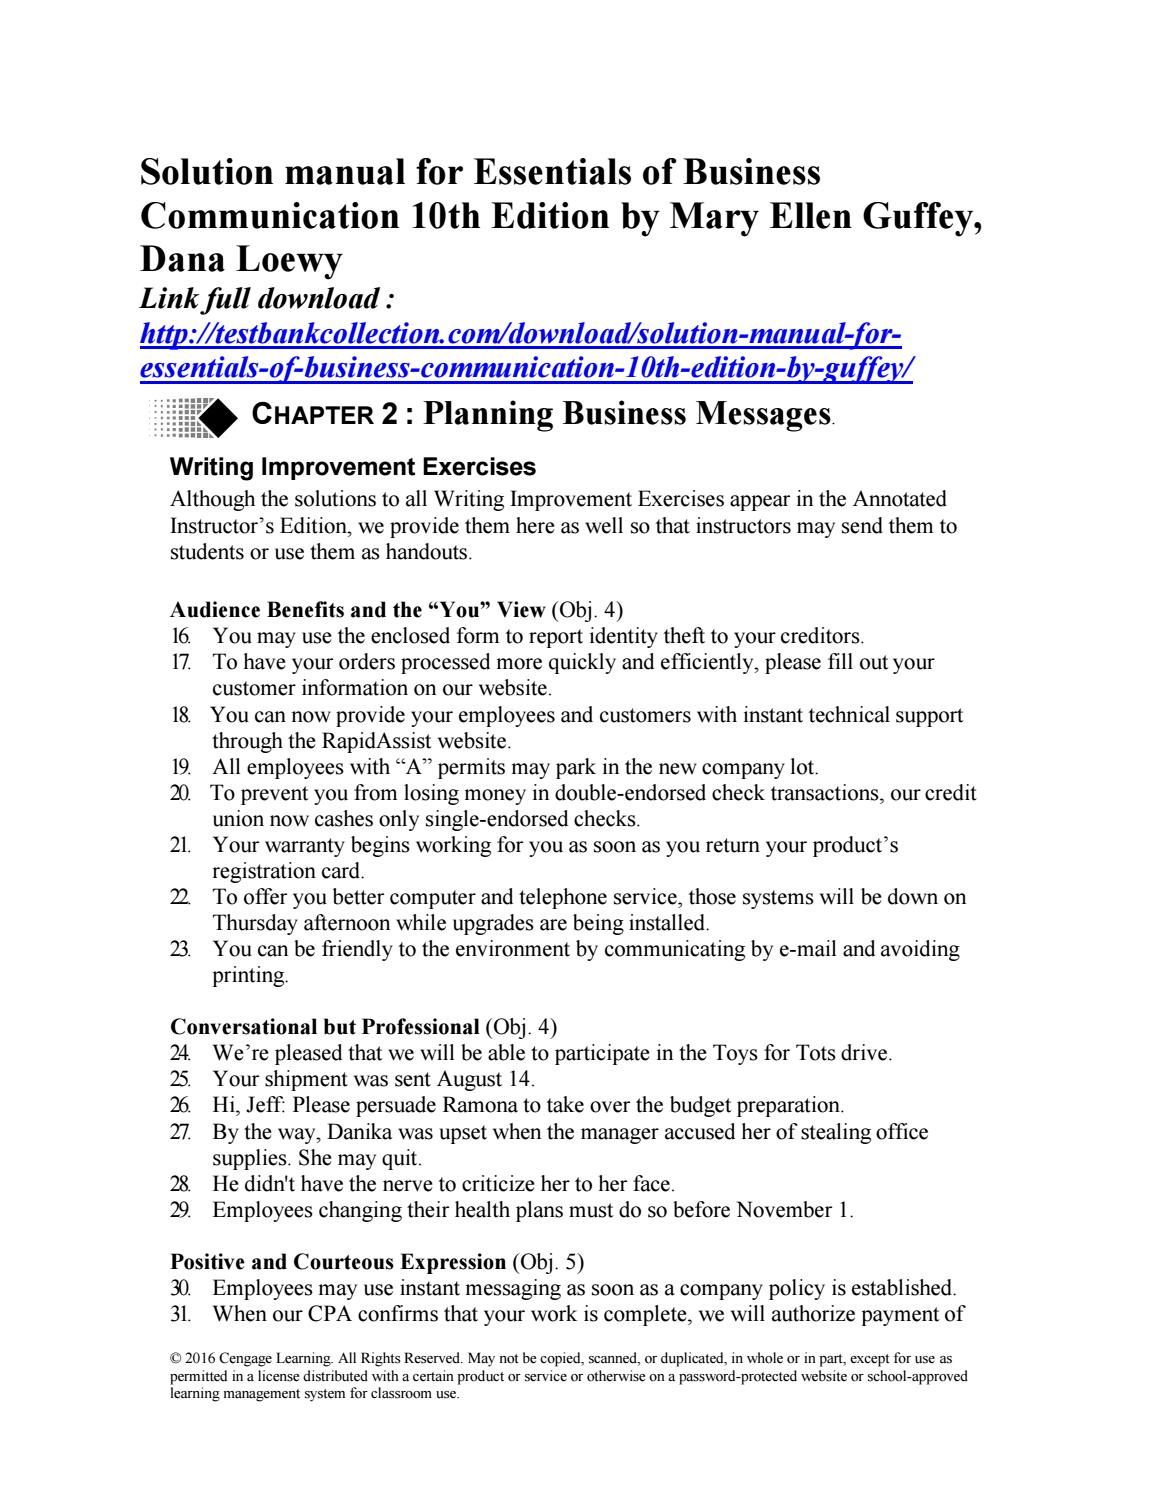 Essentials of business communication 10th edition download